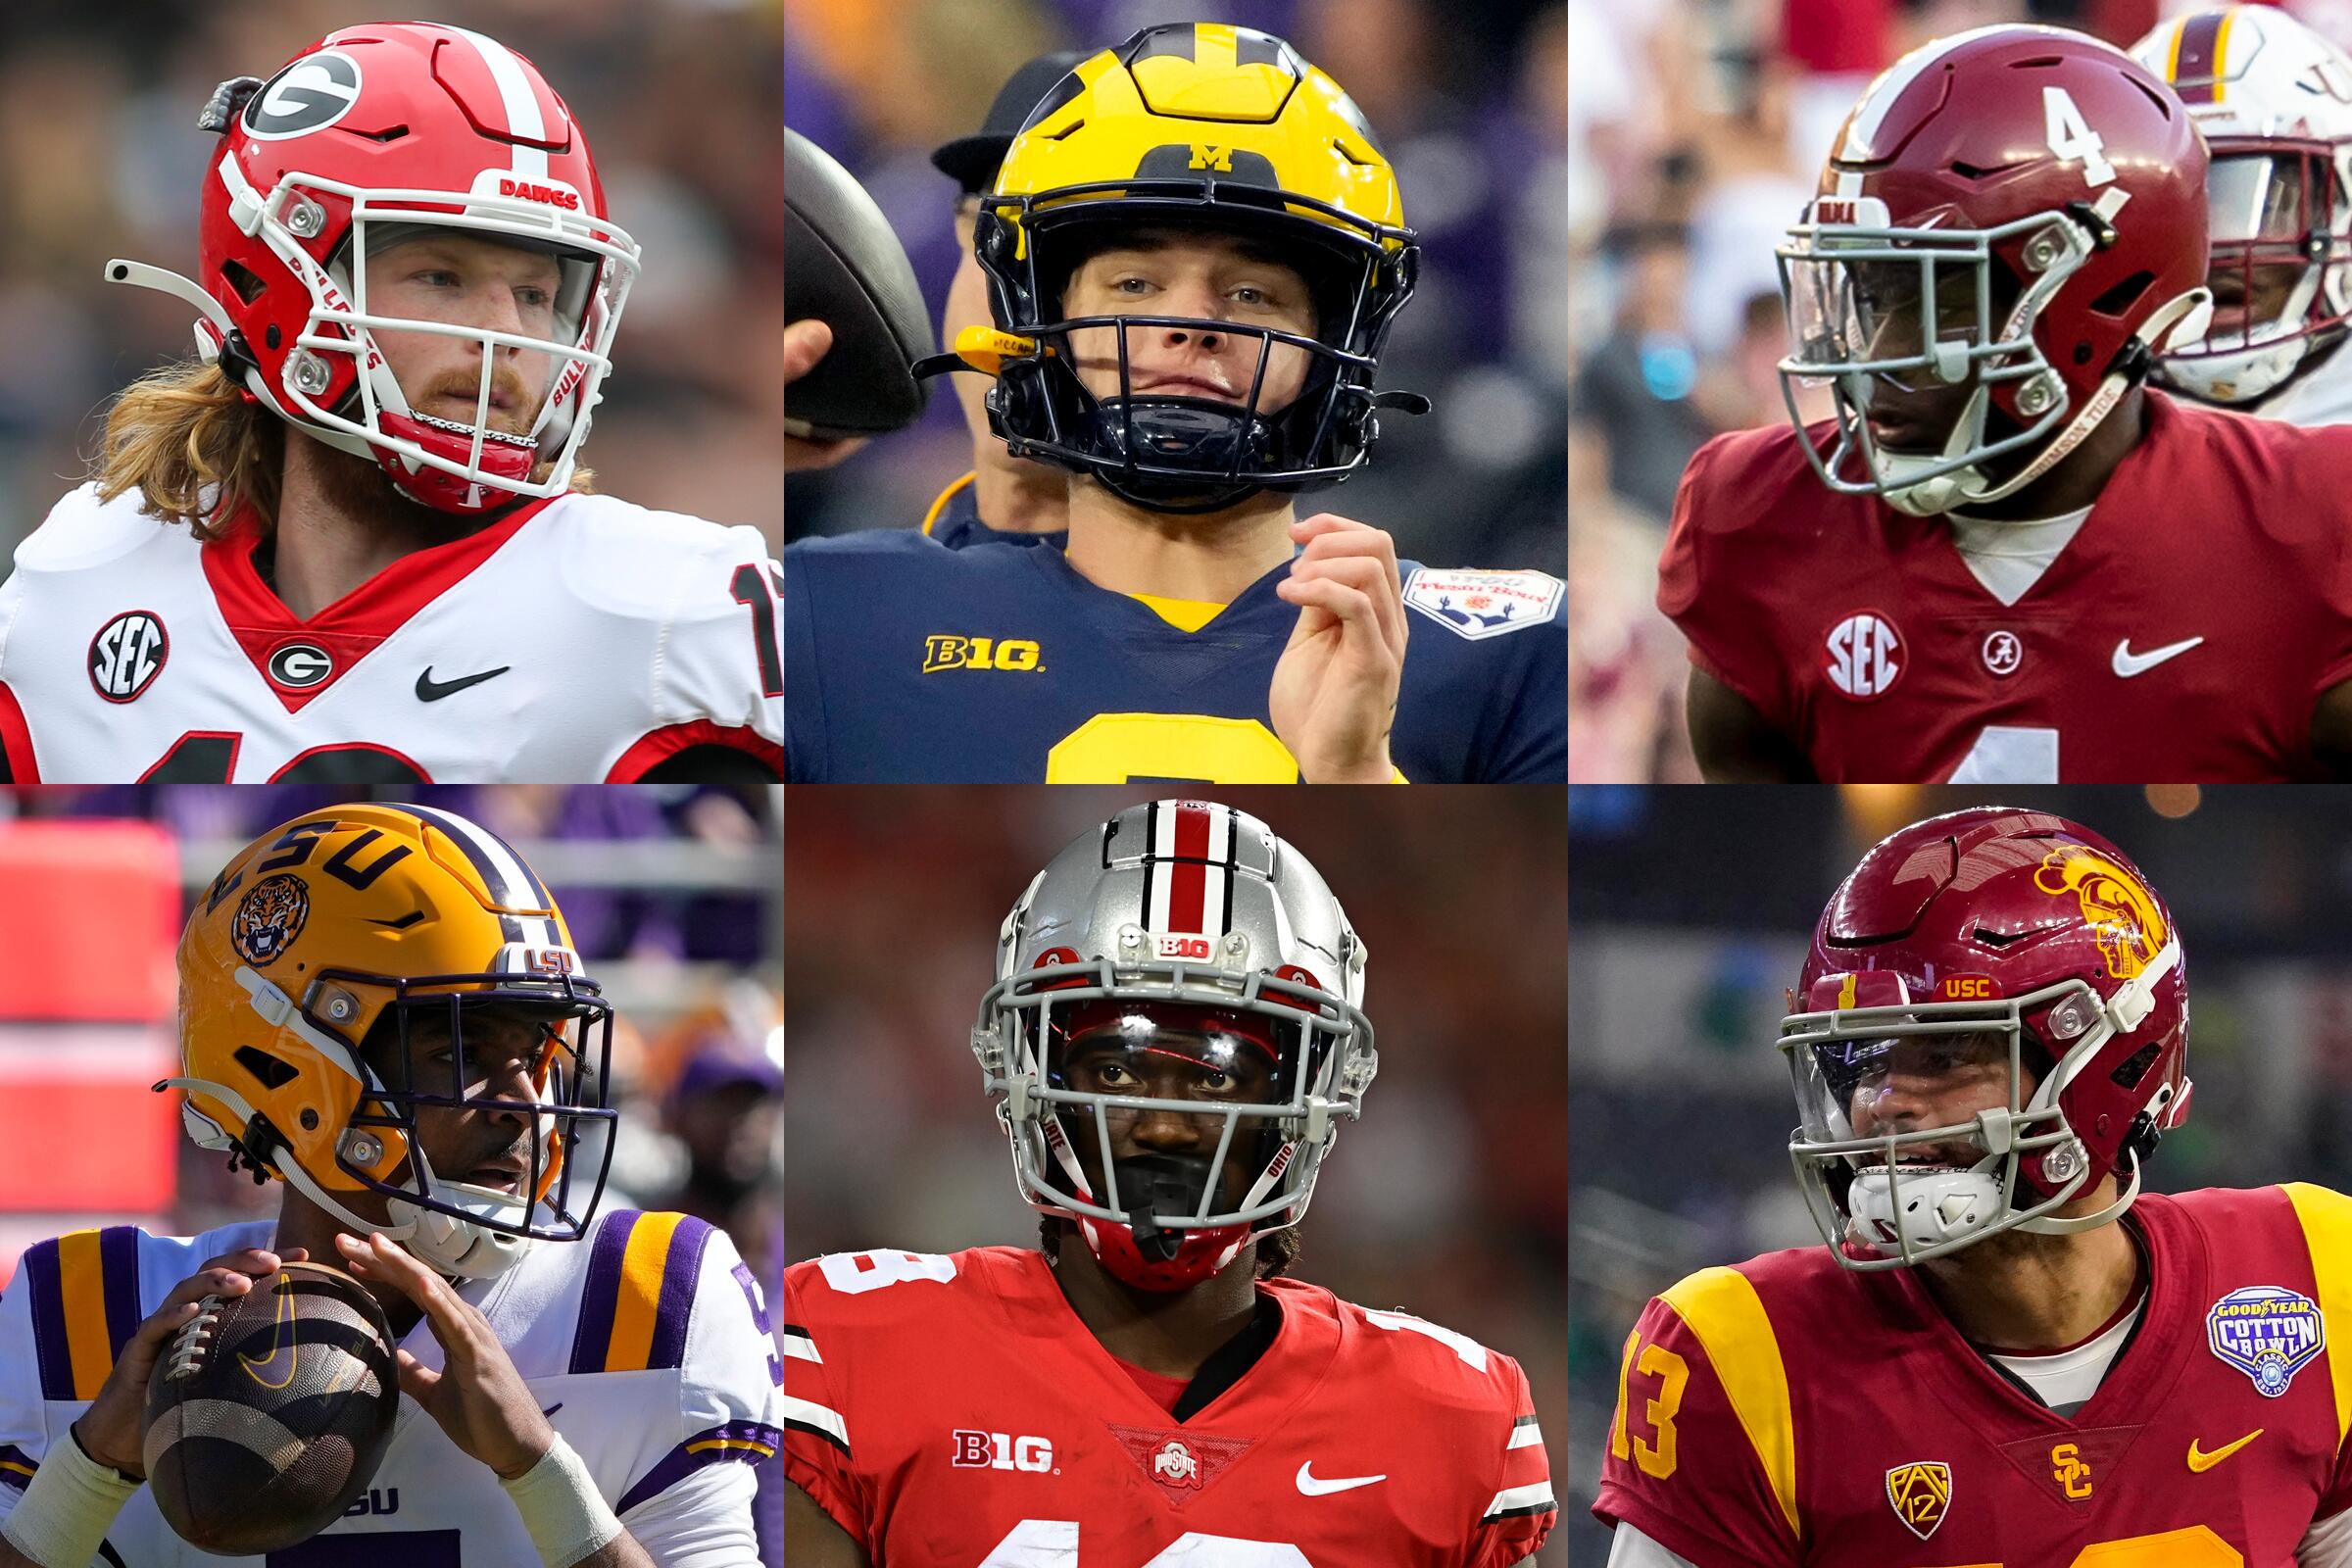 A collage of some of the top players in college football.